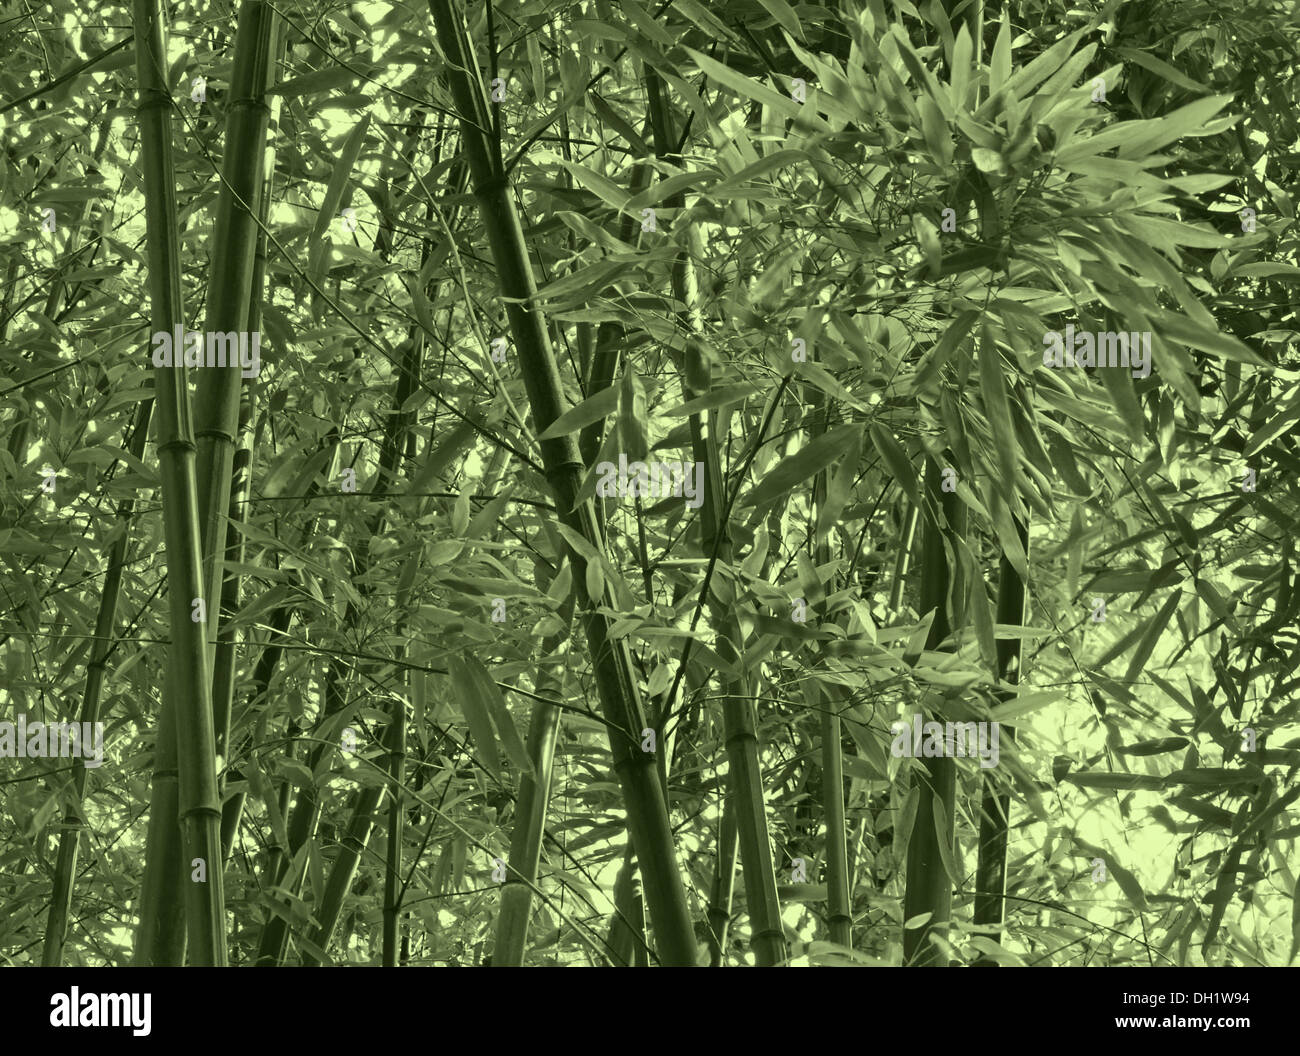 bamboo jungle in green color Stock Photo - Alamy